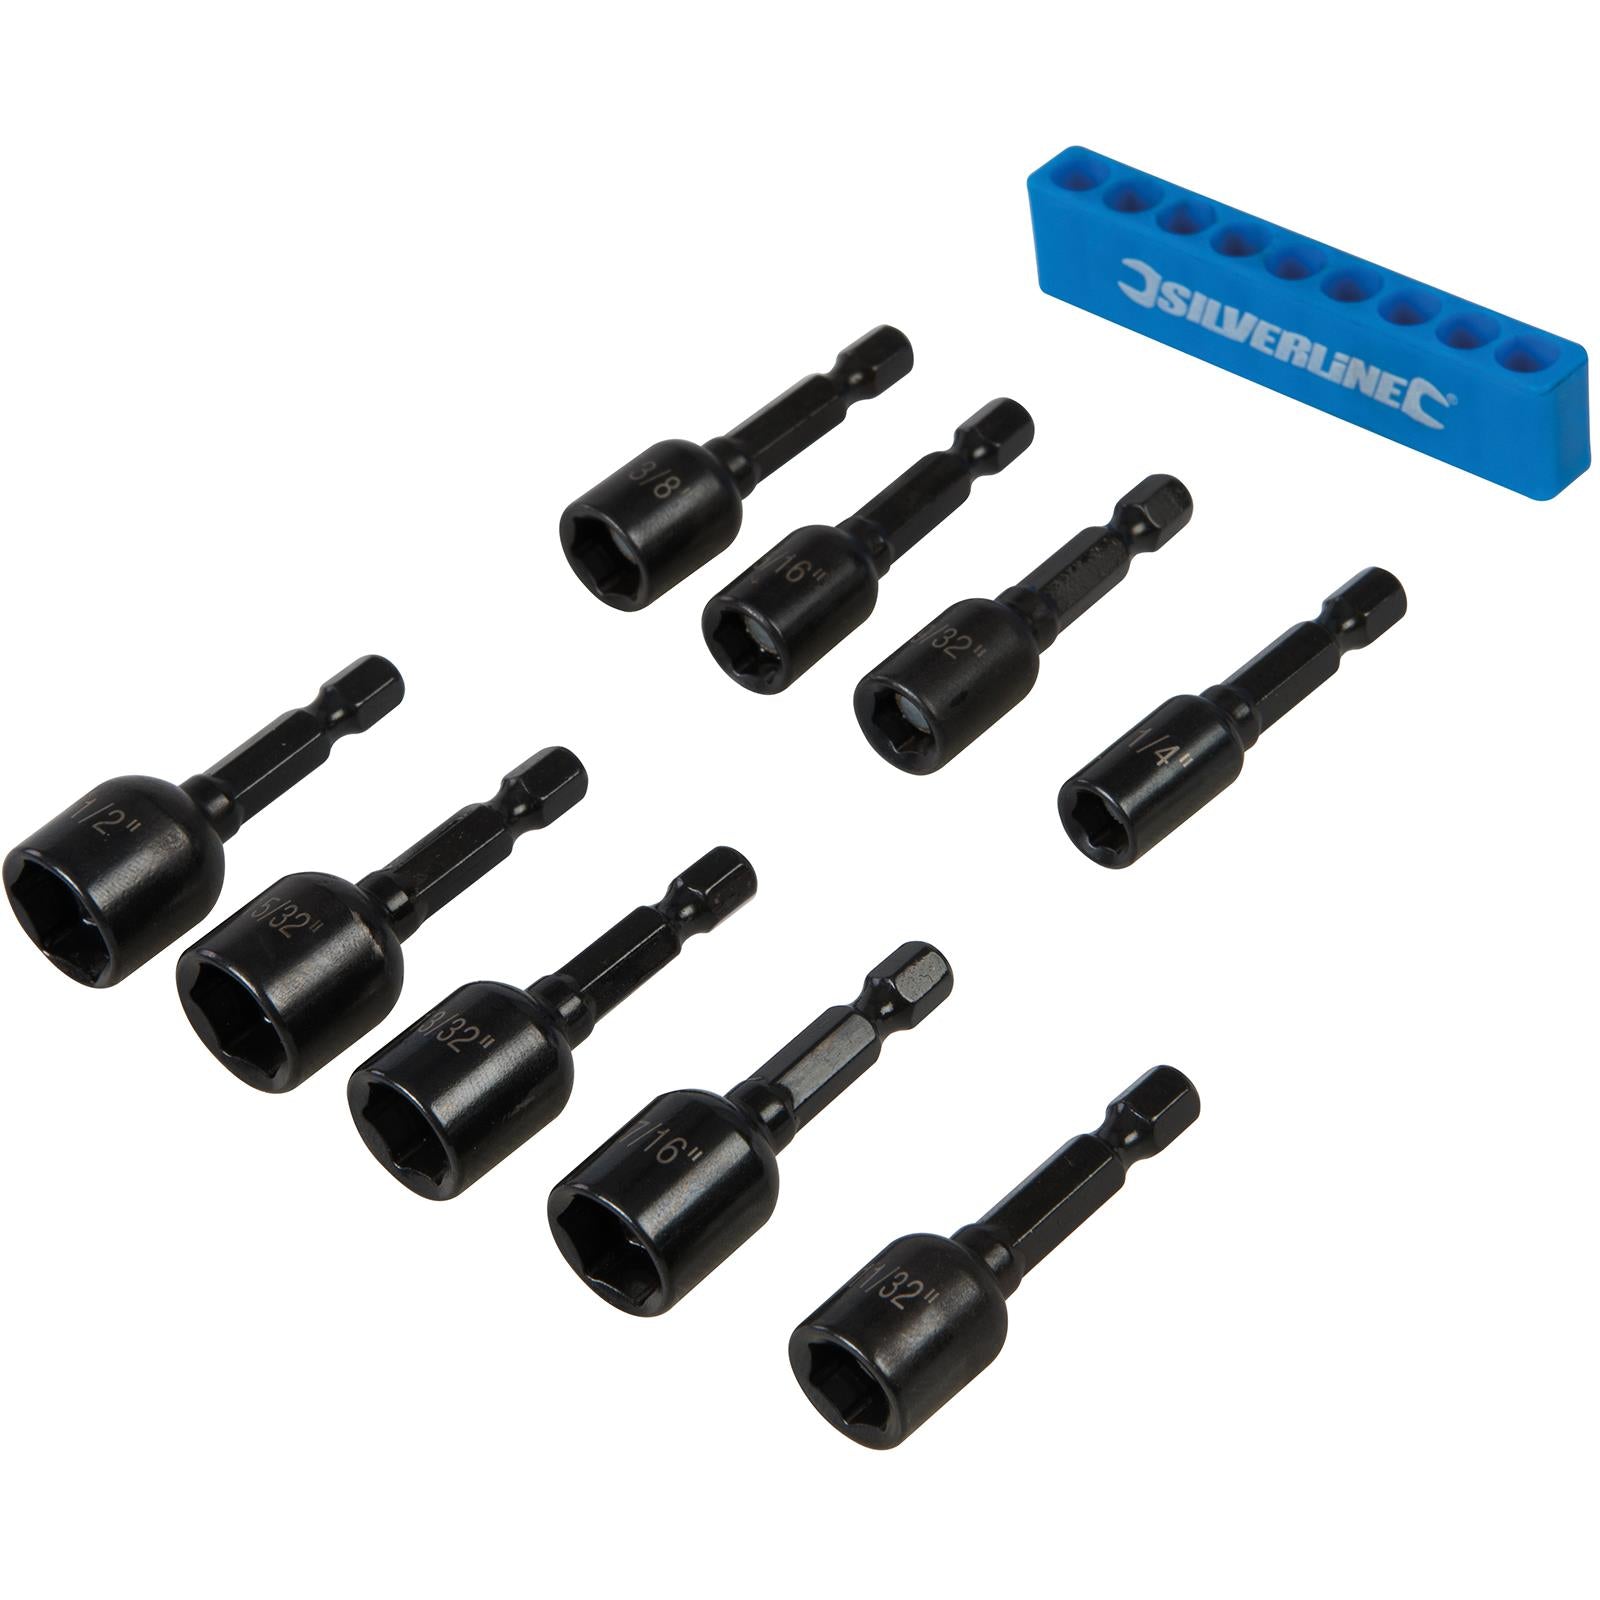 Silverline 9 Piece Imperial Magnetic Nut Driver Set 1/4"-1/2" Hex Drill Socket Adaptor